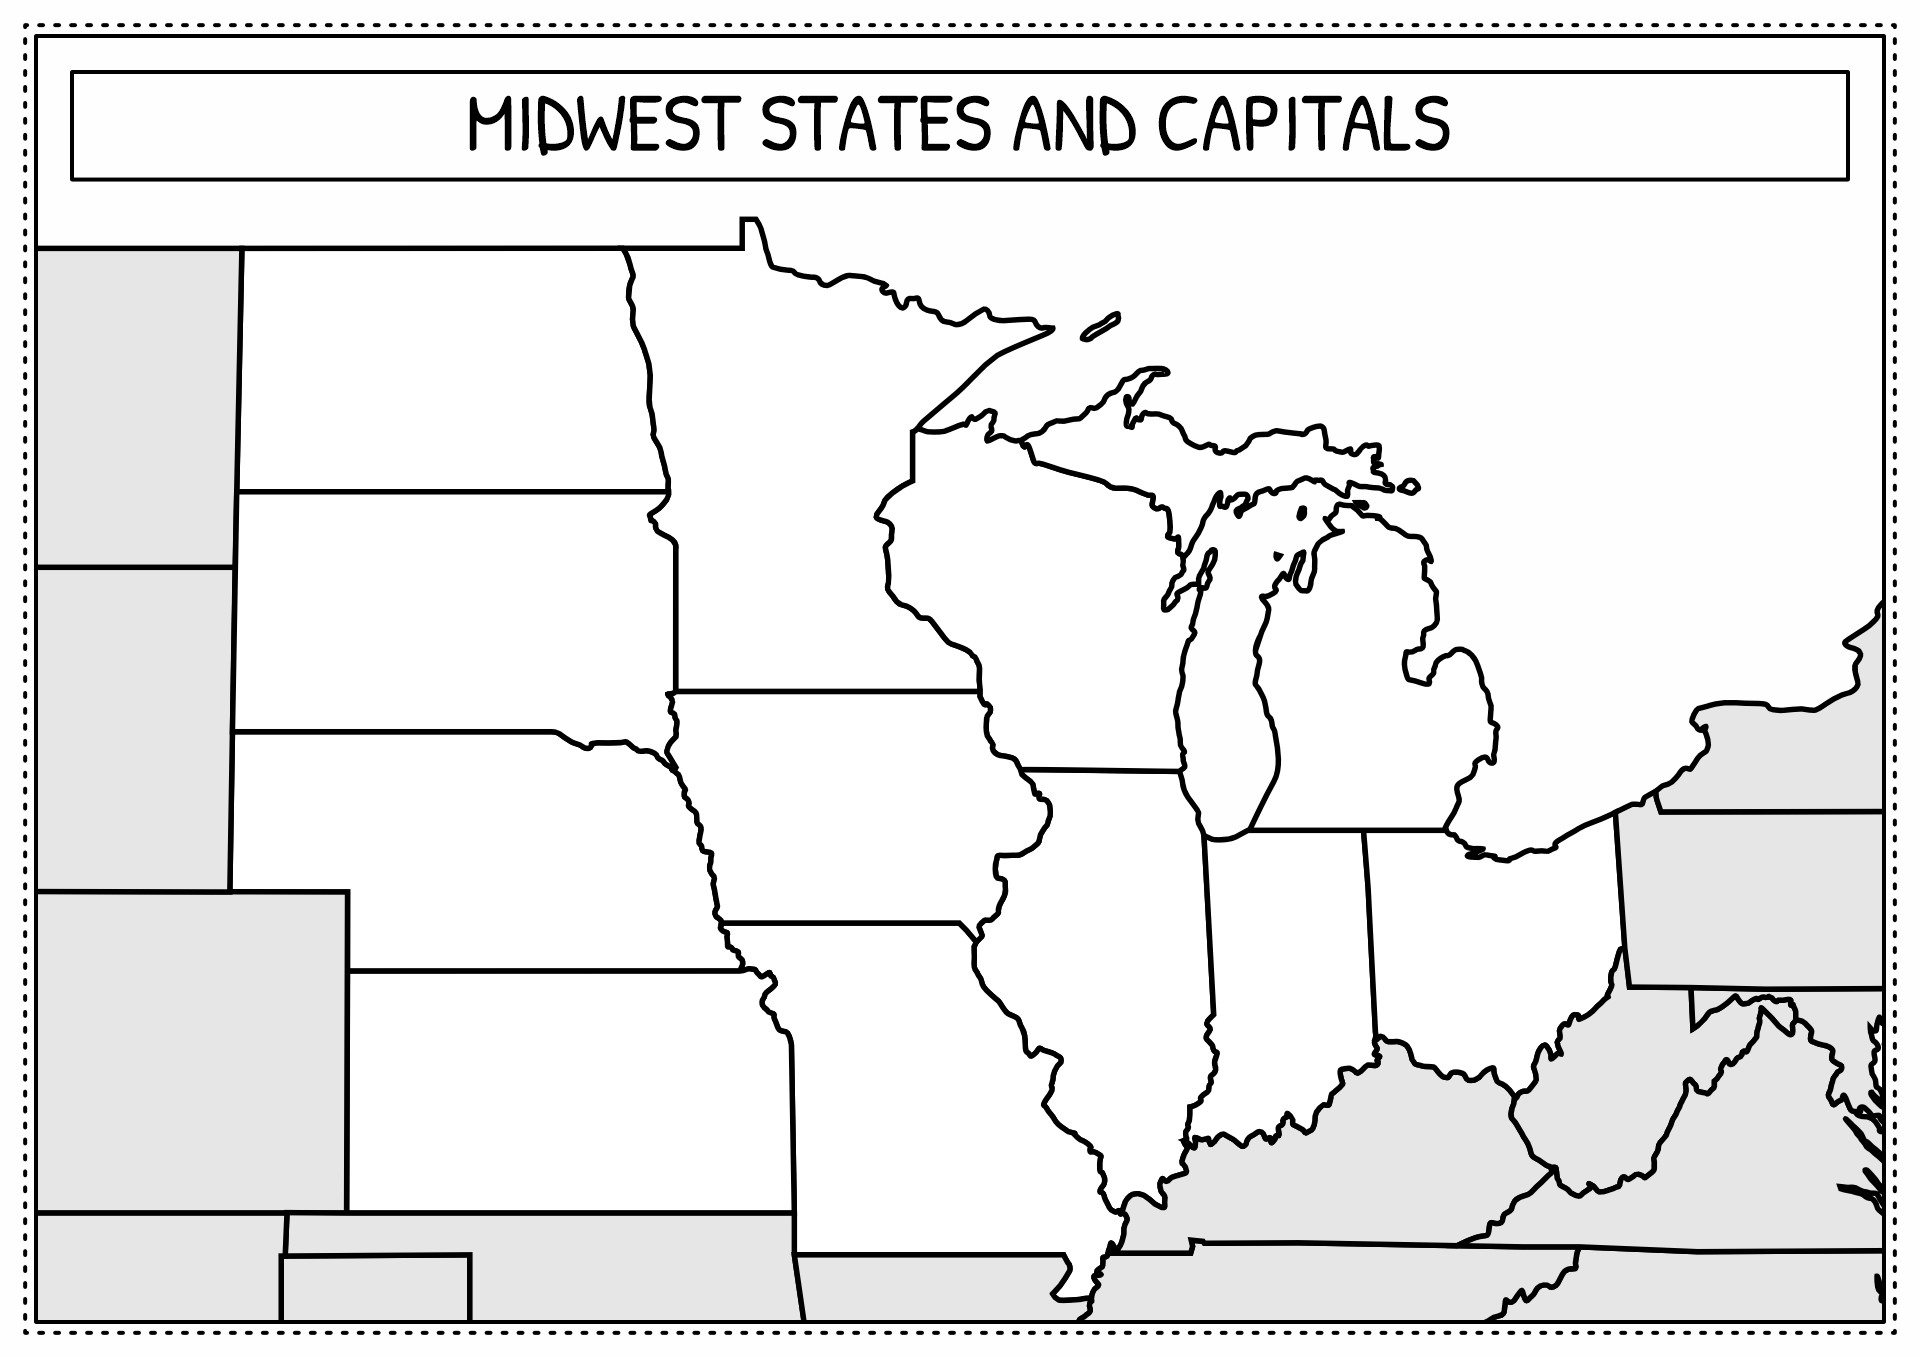 blank-midwest-states-and-capitals-map-us-map-printable-blank-sexiz-pix